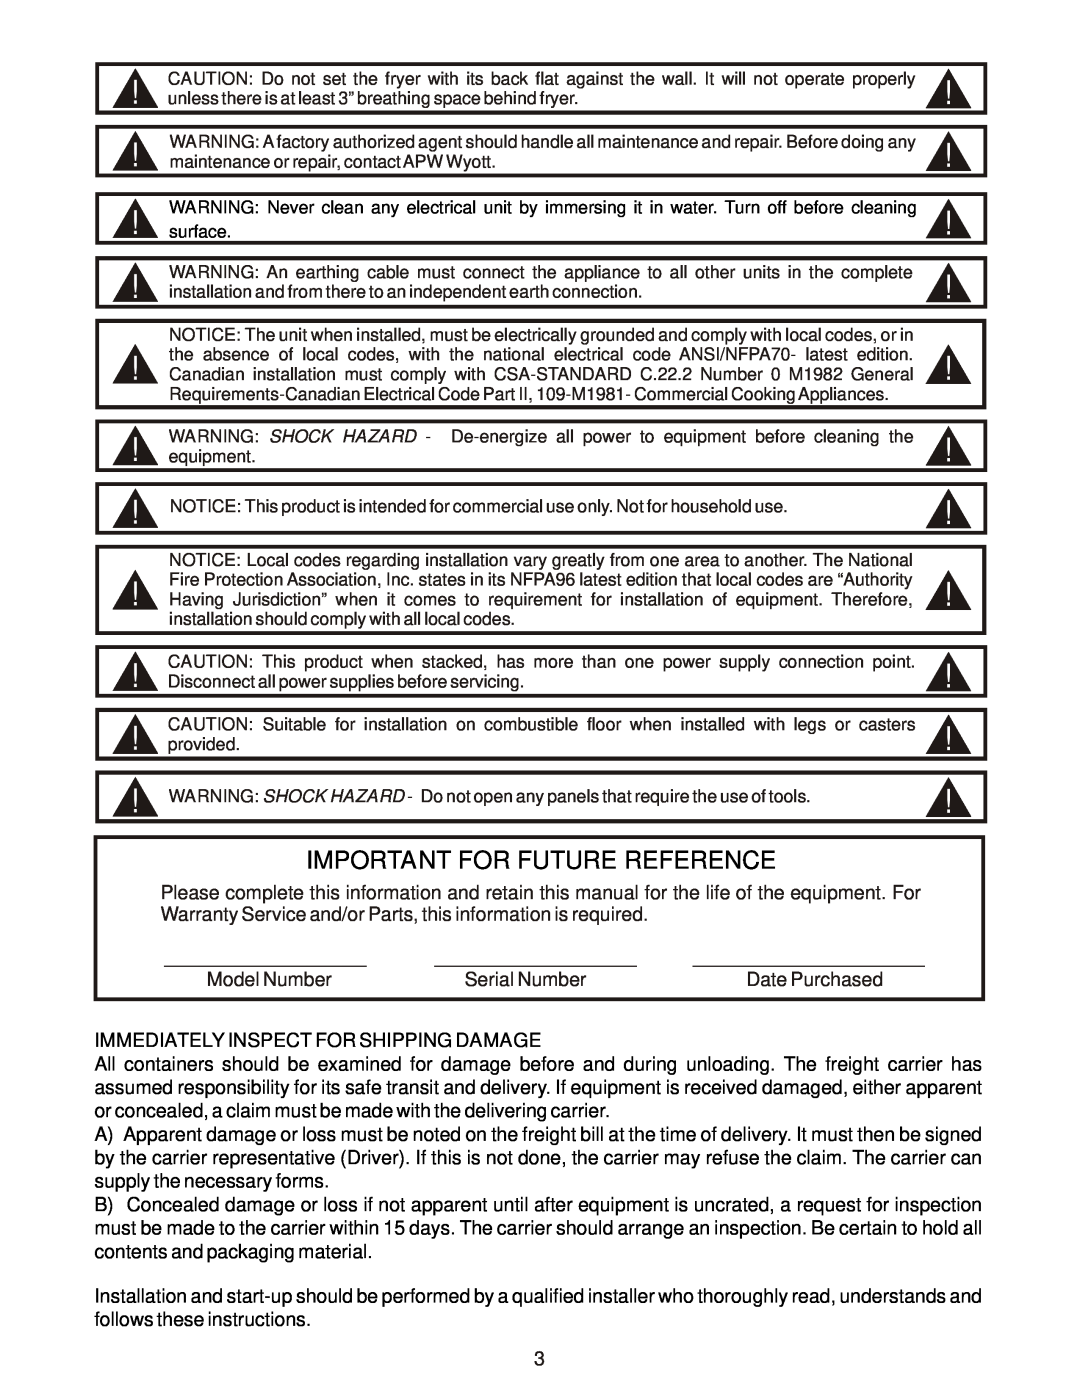 APW Wyott EF-30 operating instructions Important For Future Reference, Immediately Inspect For Shipping Damage 